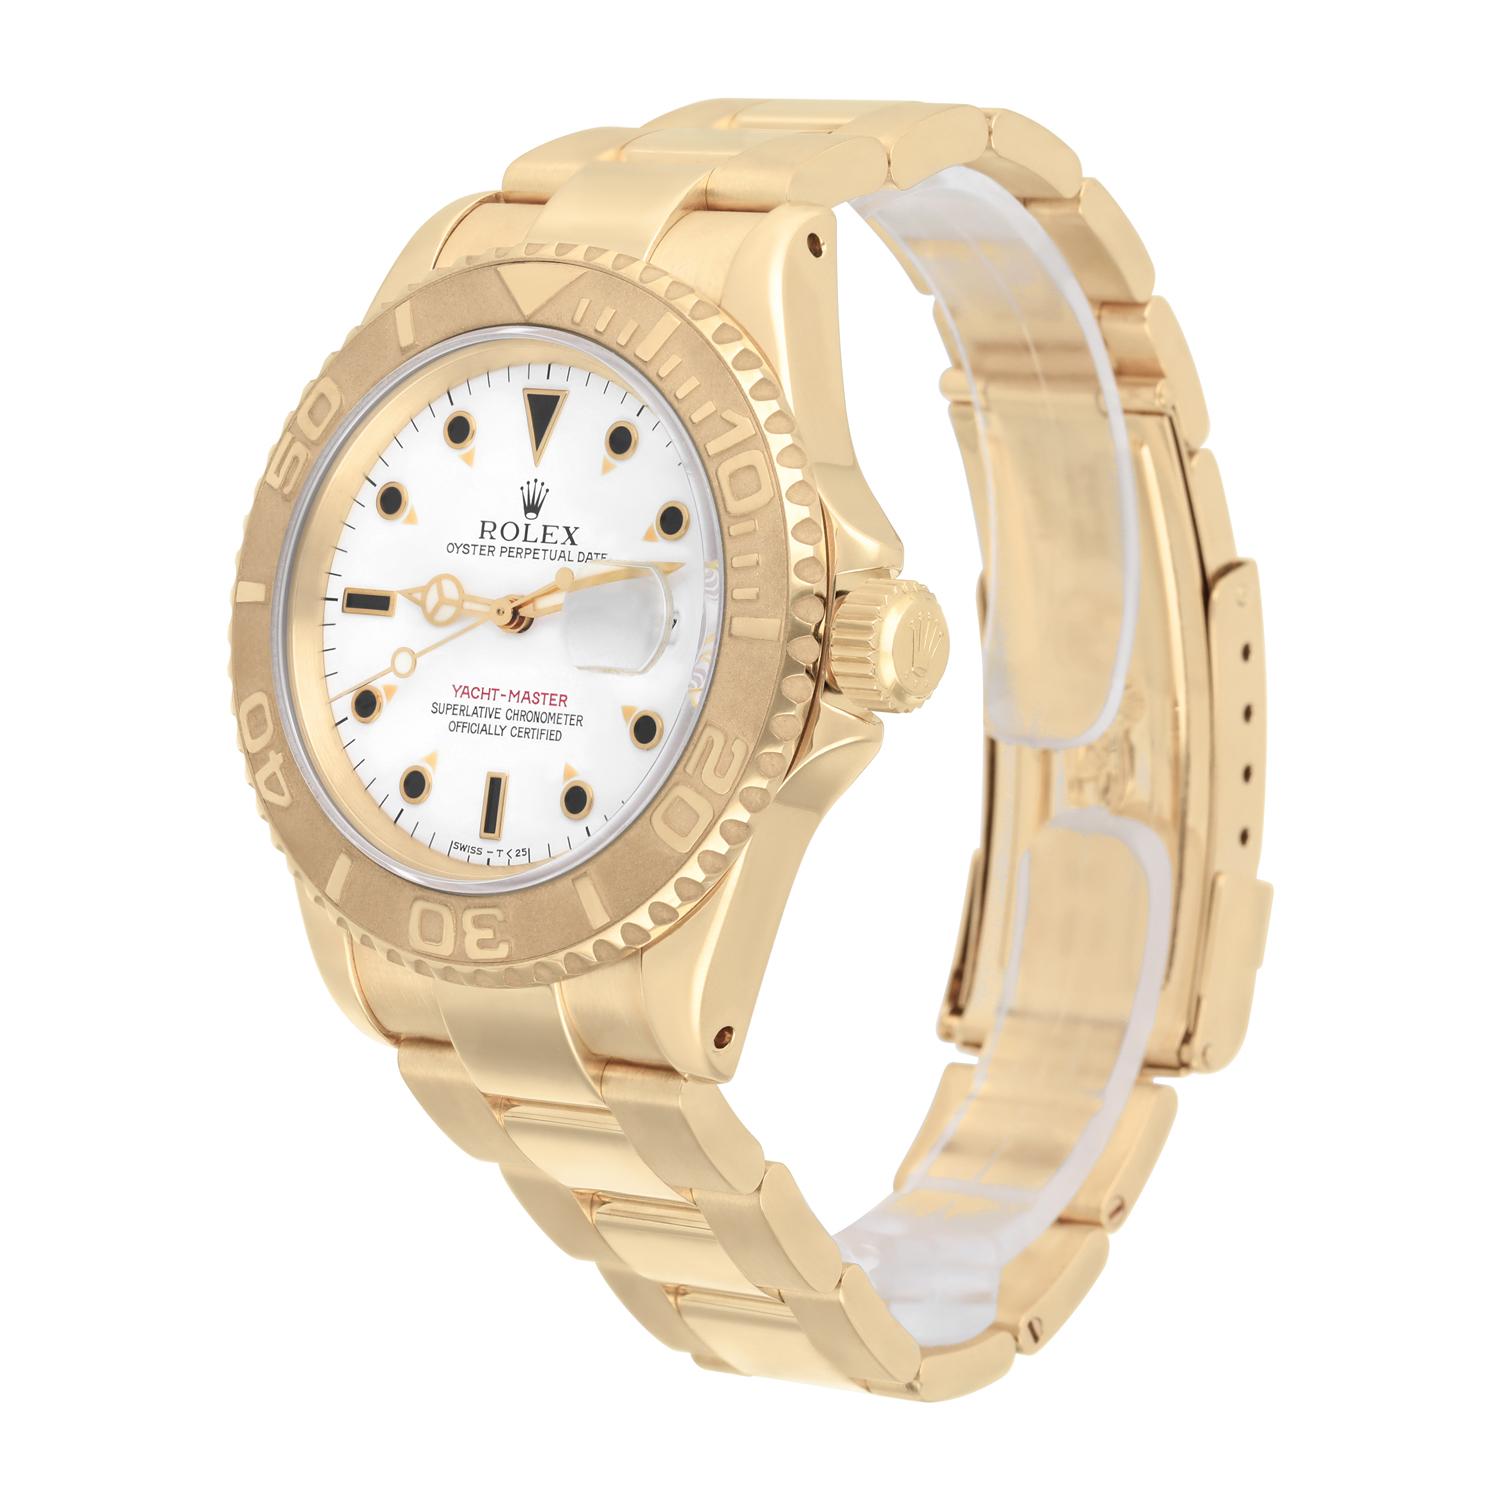 Rolex Yatch Master 40MM 16628 White Dial Yellow Gold Oyster Bracelet In Excellent Condition For Sale In New York, NY